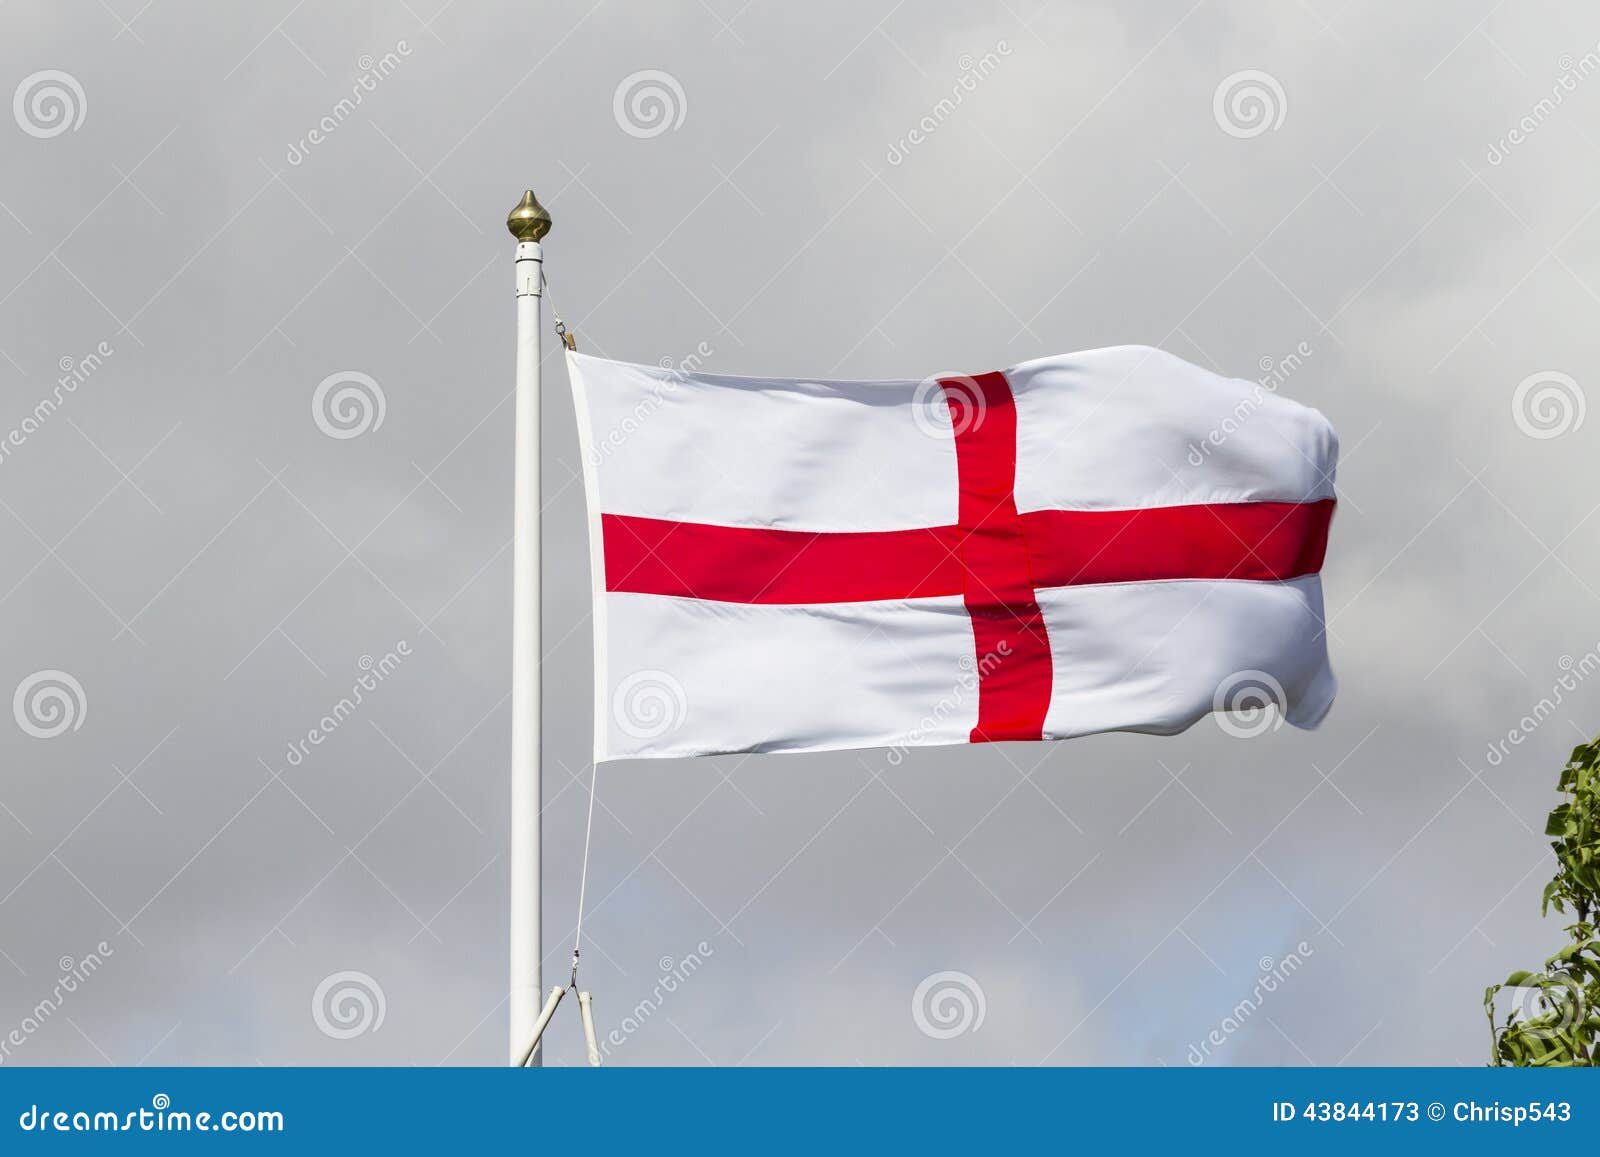 Get high-quality images of Red cross white background flag for your graphic designs or presentations